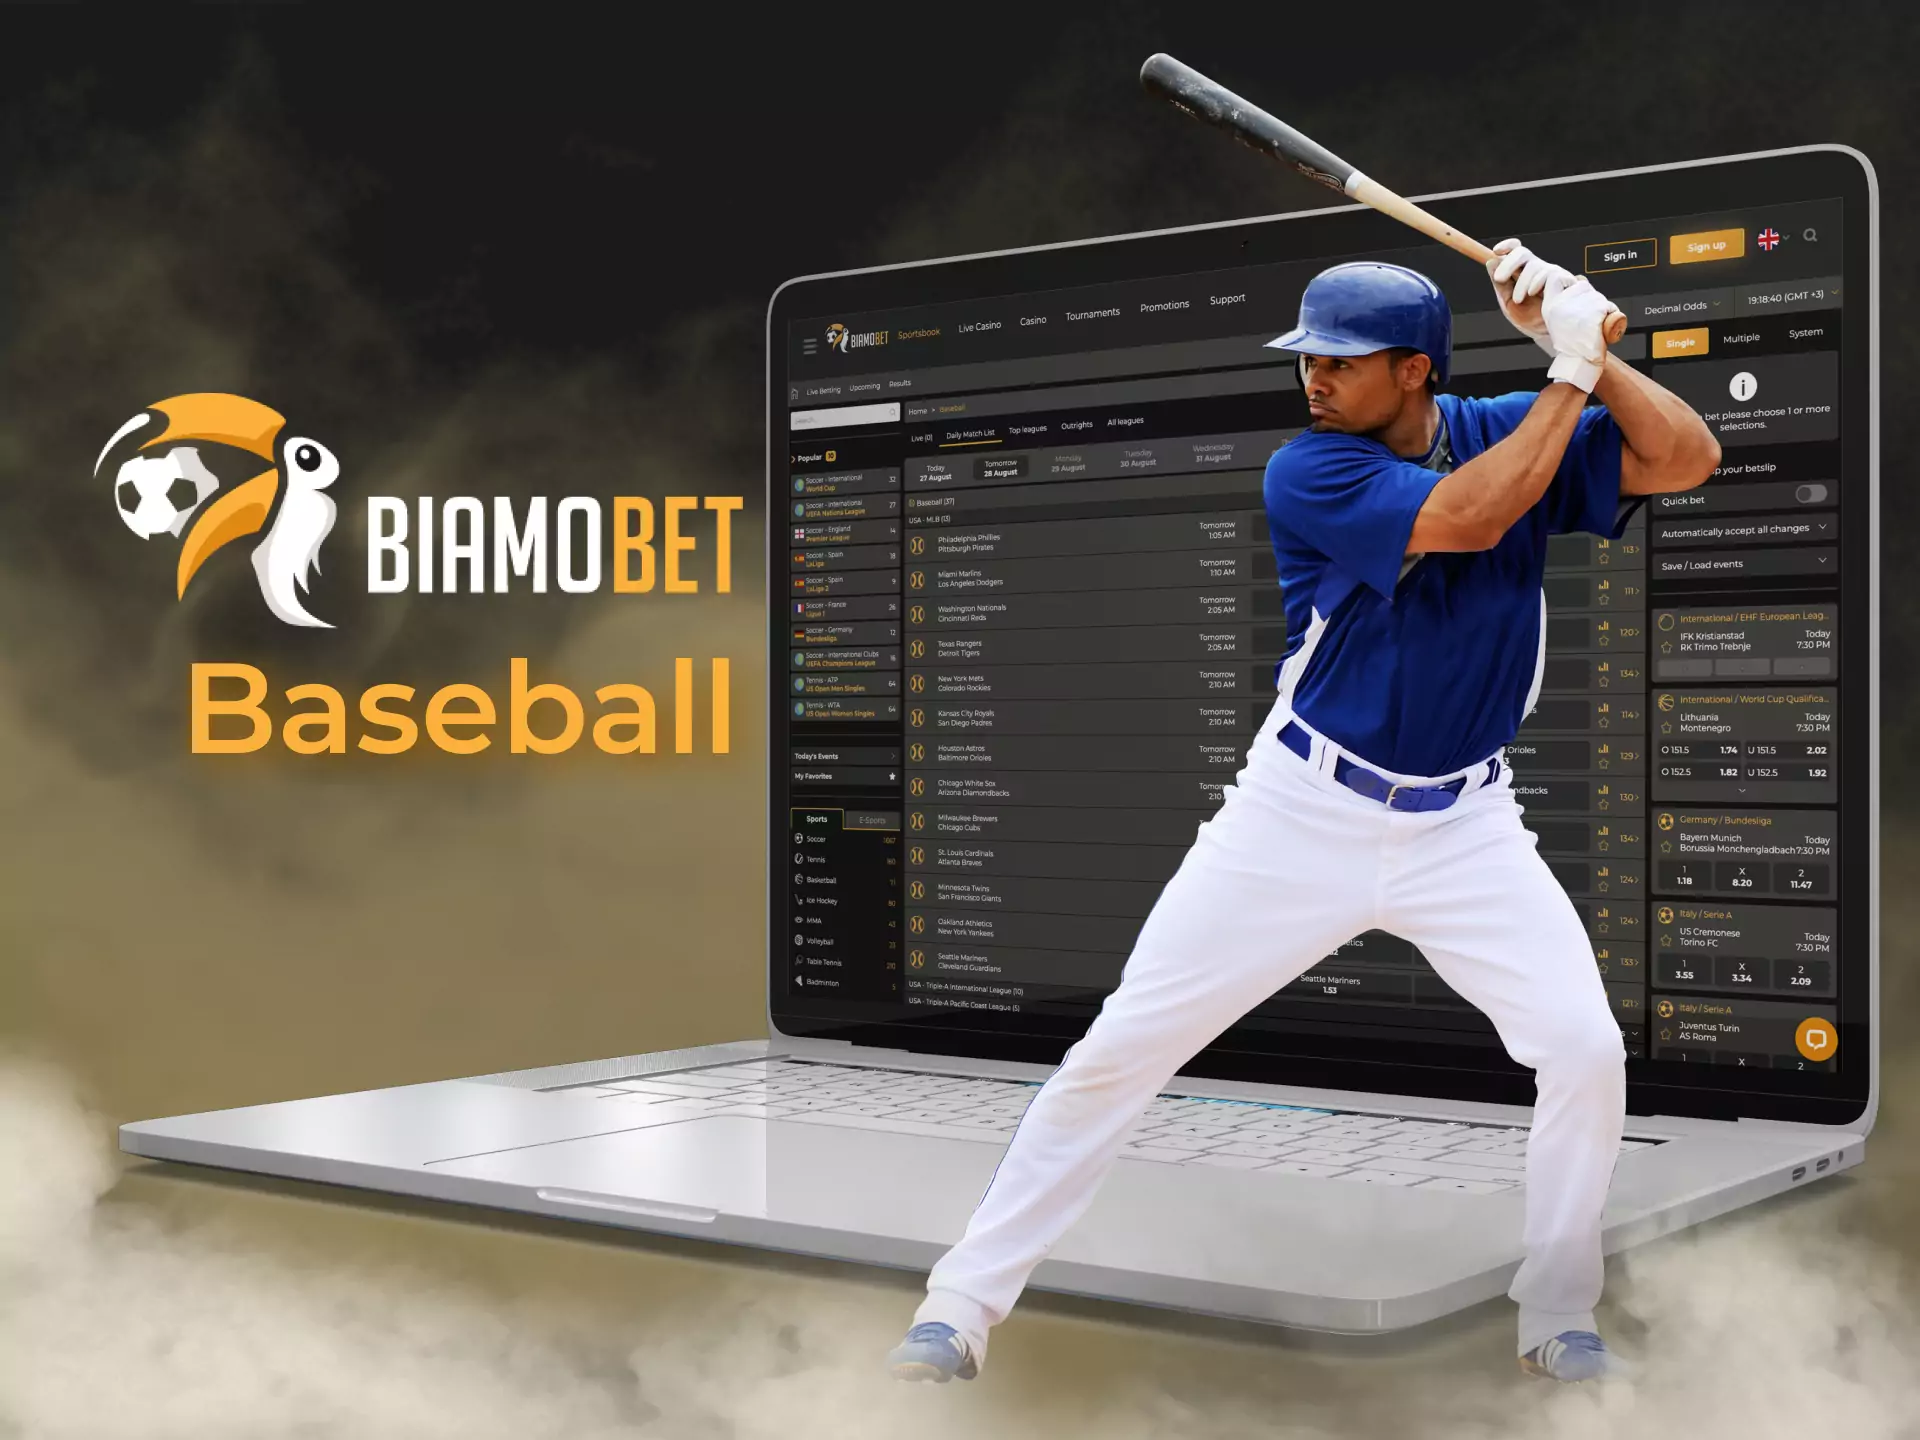 You can place a bet on baseball matches on Biamobet.